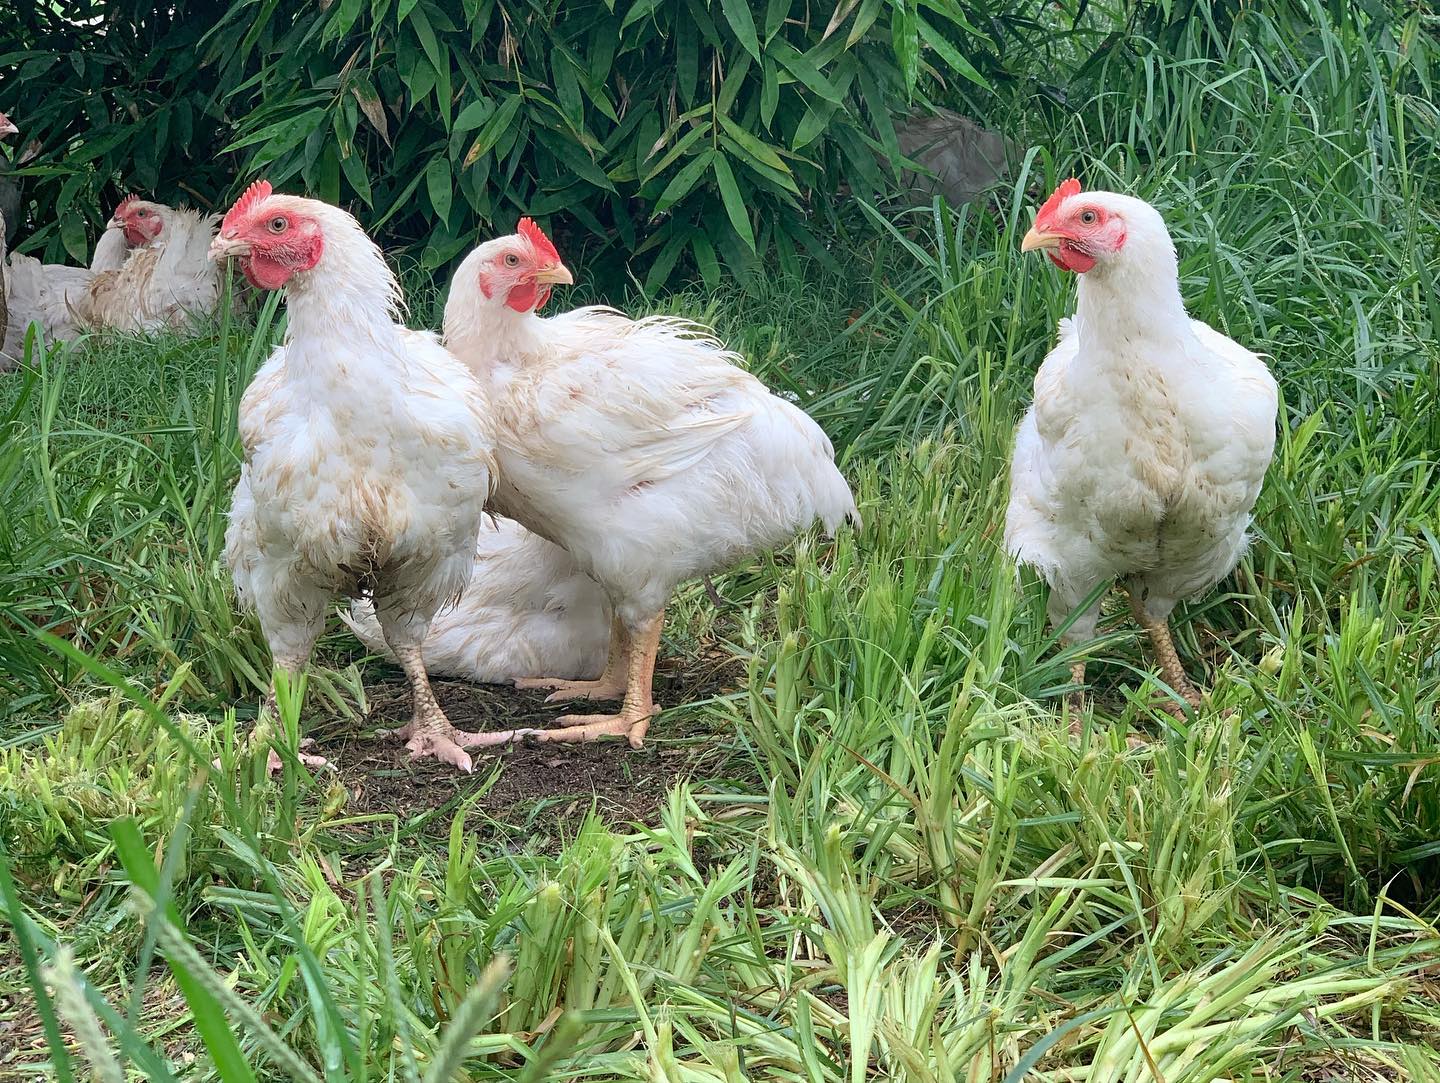 three white chickens on some lush green grass, from Bendele's facebook